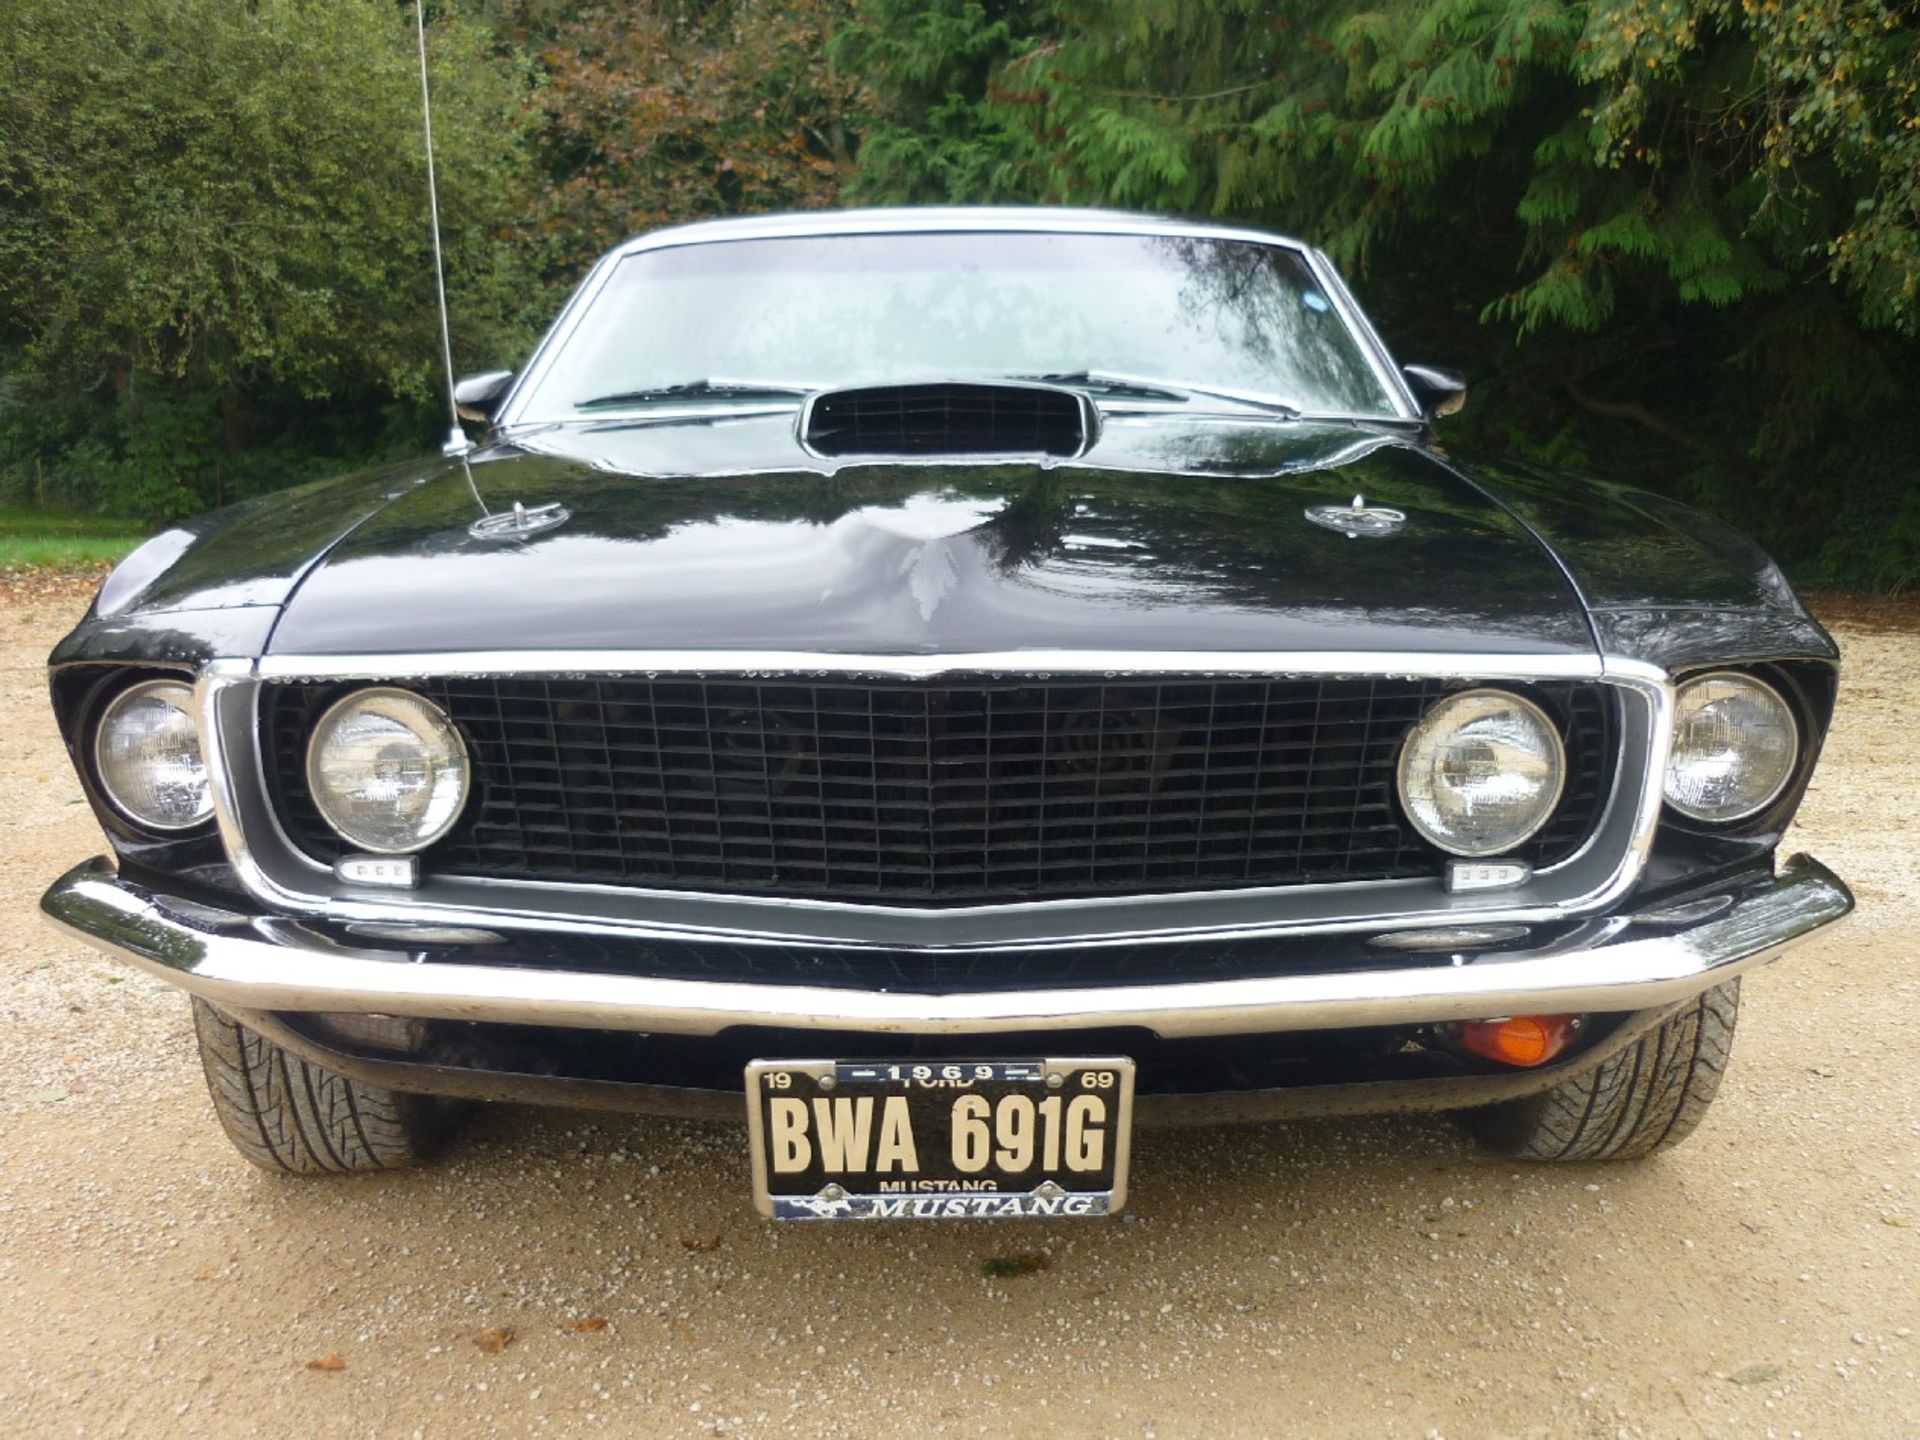 A 1969 Ford Mustang Fastback 351, registration number BWA 691G, chassis number 9T02H185415, black - Image 4 of 6